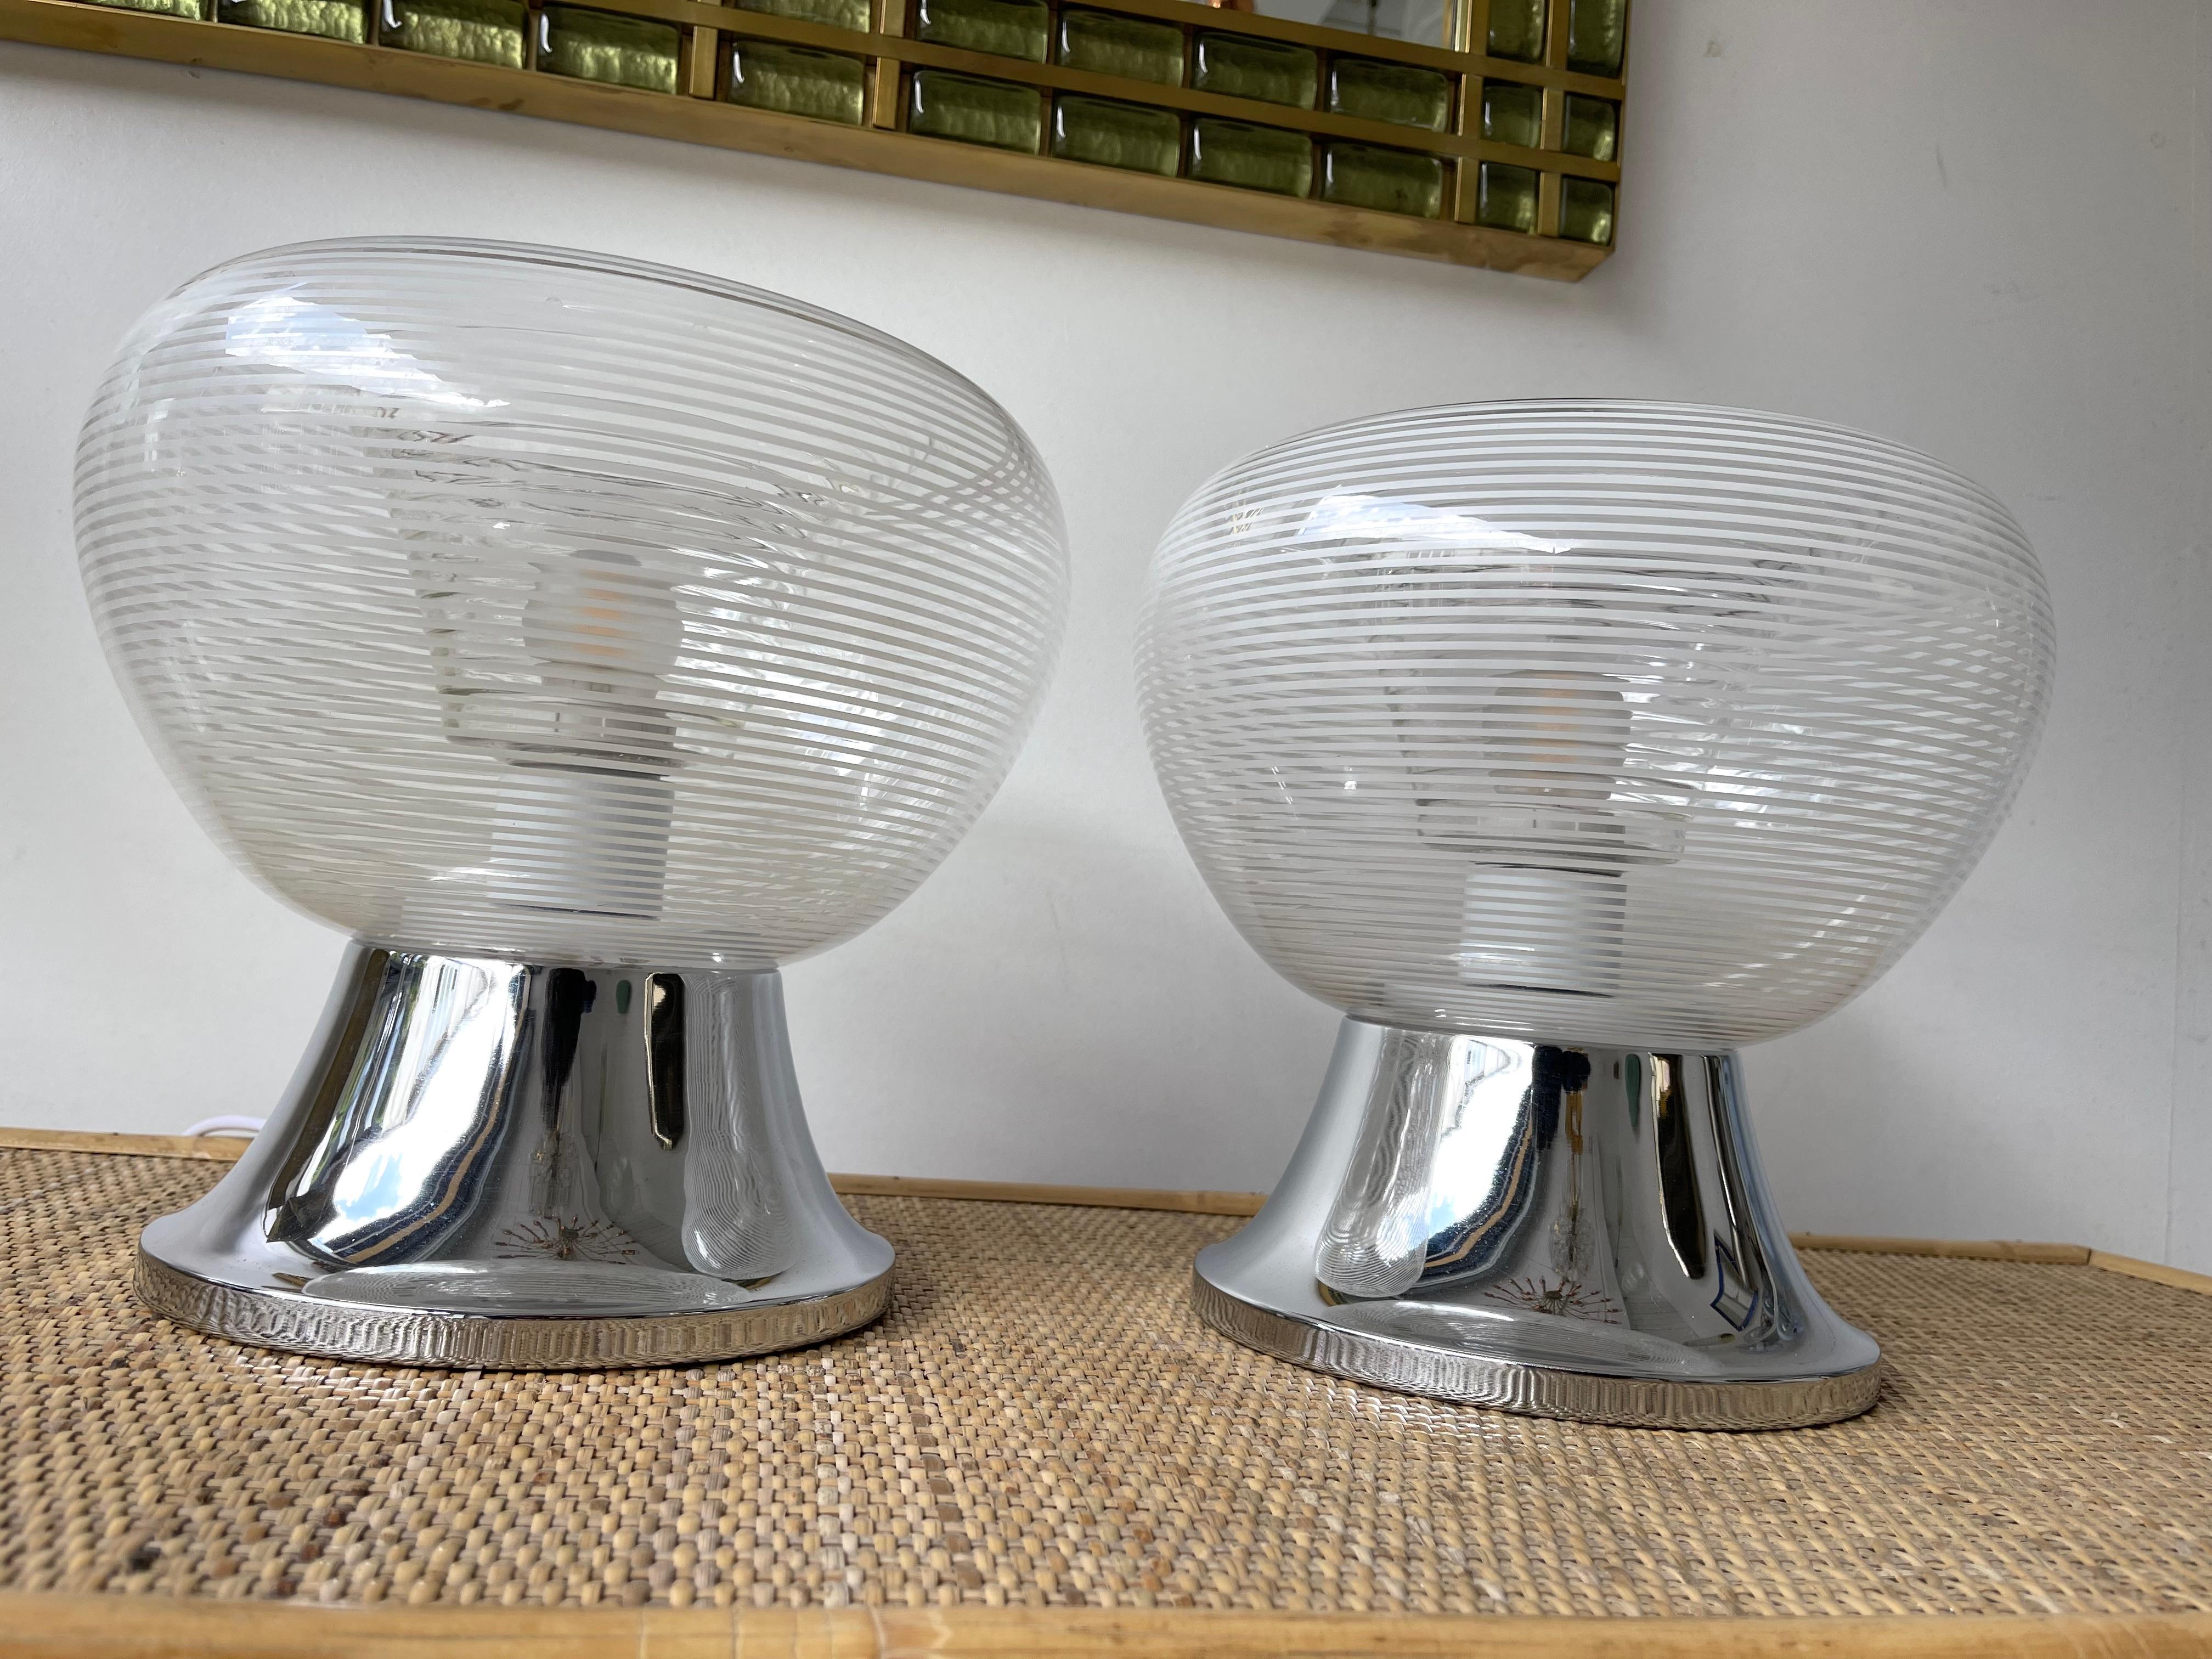 Pair of Stripe Murano Glass and Metal Chrome Lamps by VeArt, Italy, 1970s For Sale 5